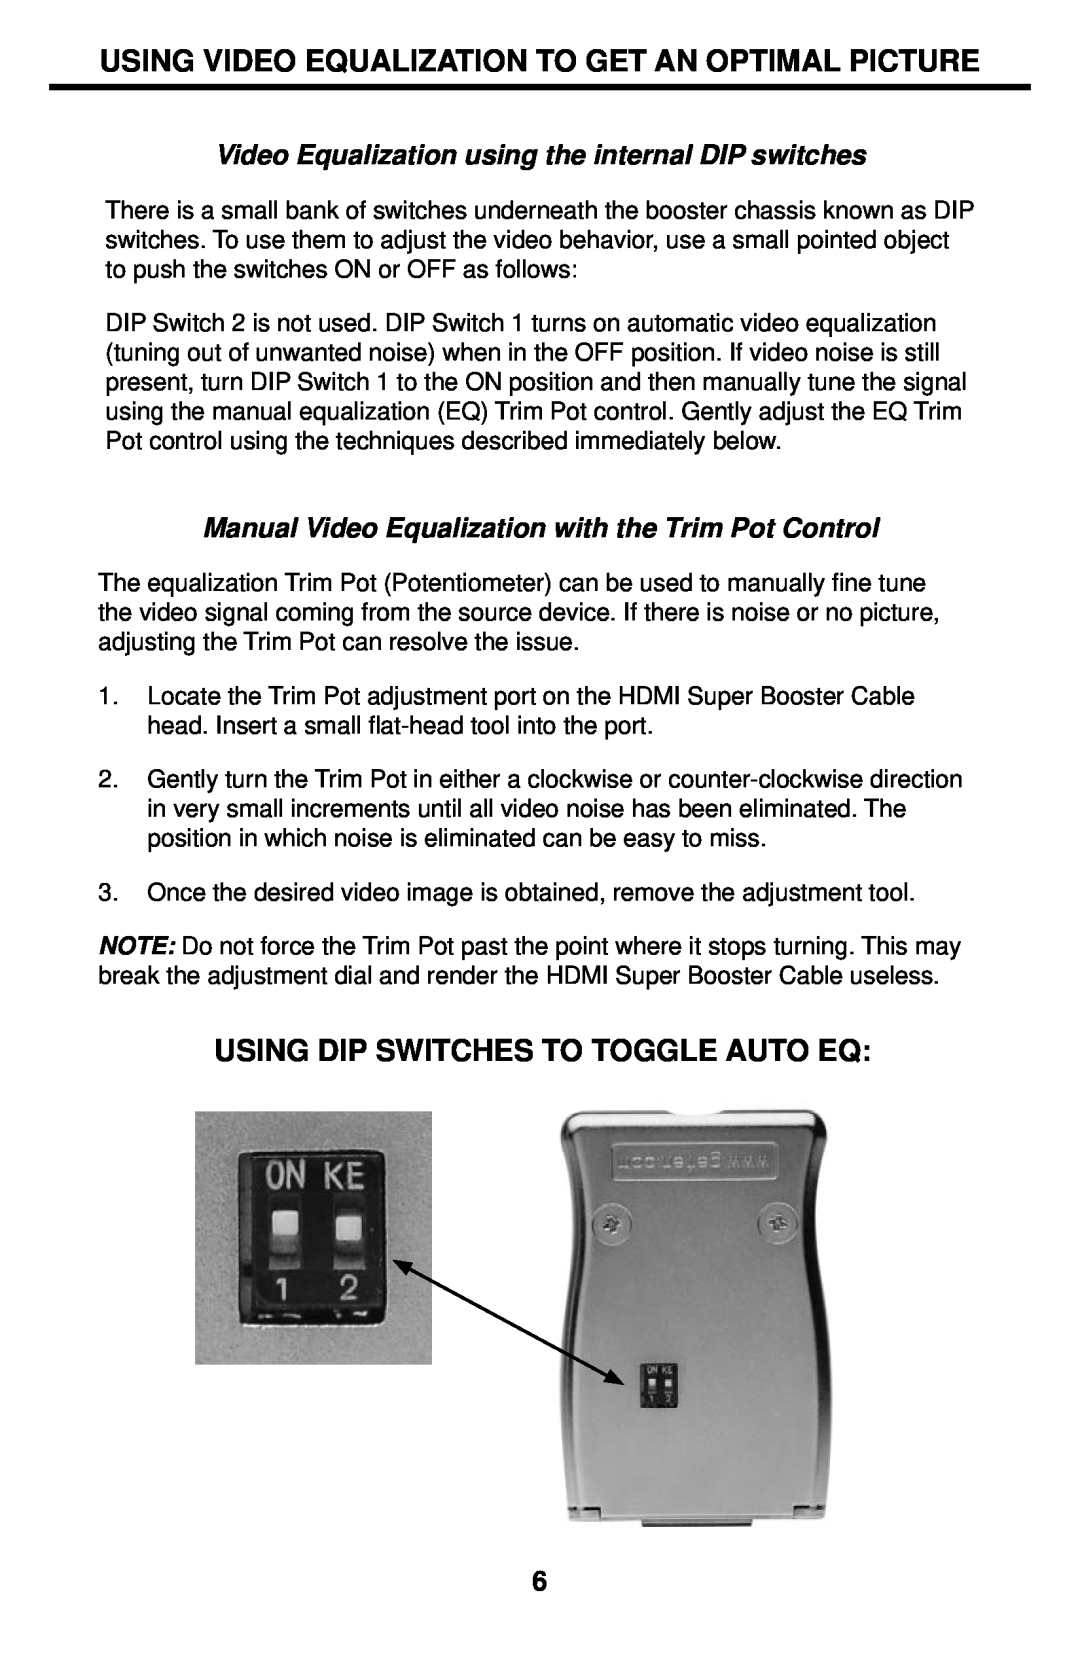 Gefen EXT-HDMISB user manual Using Video Equalization To Get An Optimal Picture, Using Dip Switches To Toggle Auto Eq 